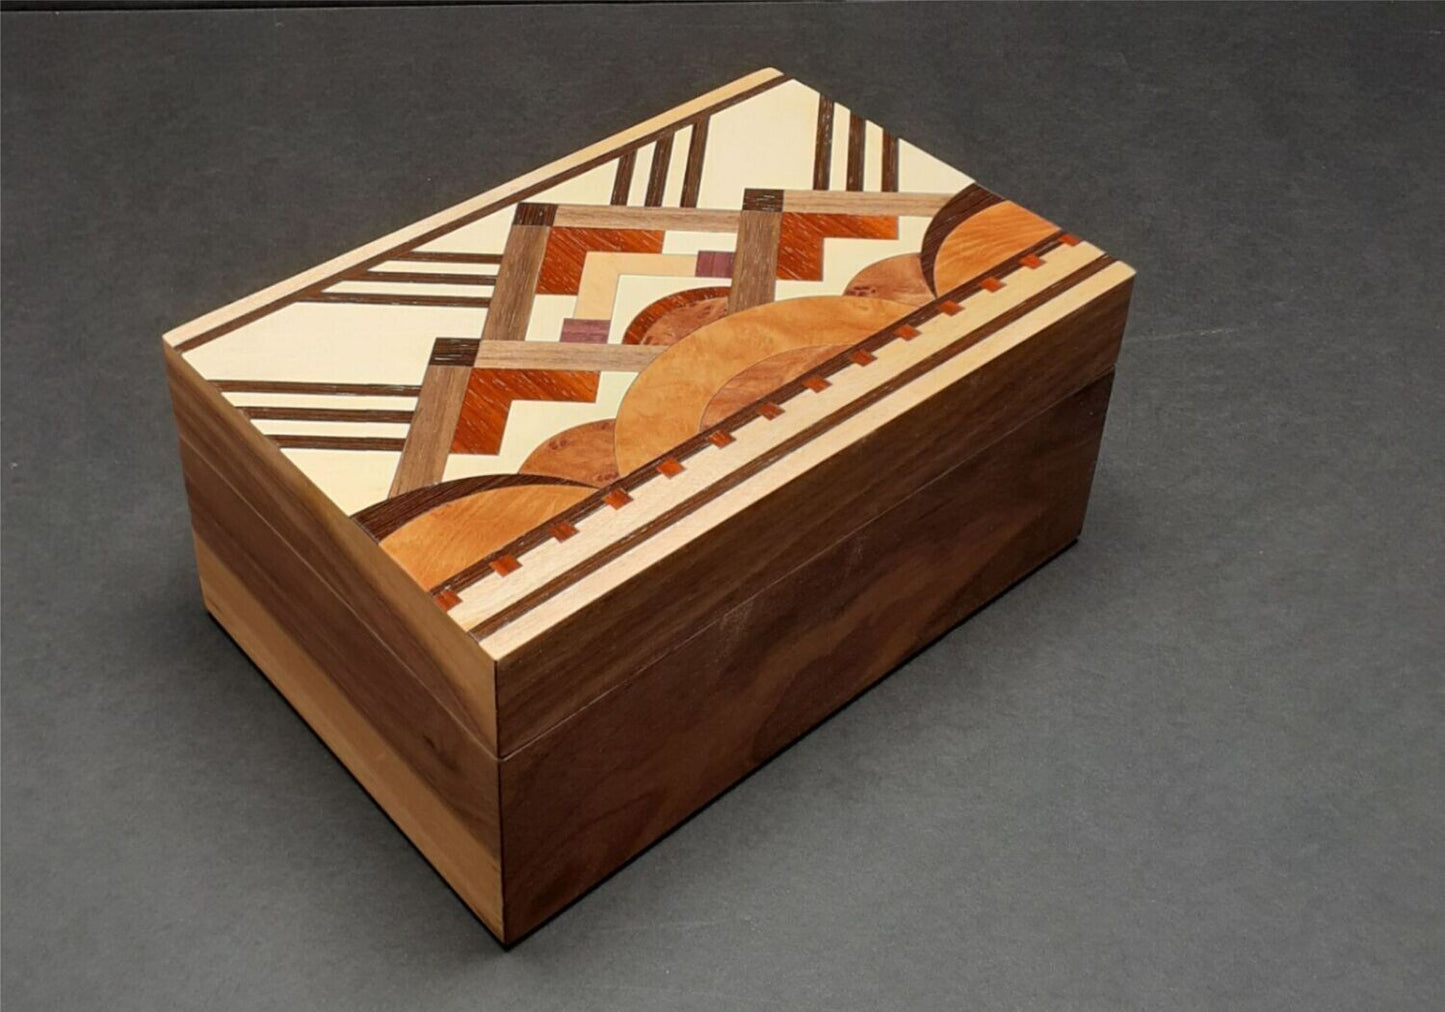 Inlaid Handcrafted Jewelry Box - "Art Deco 2"  Made in the U.S.